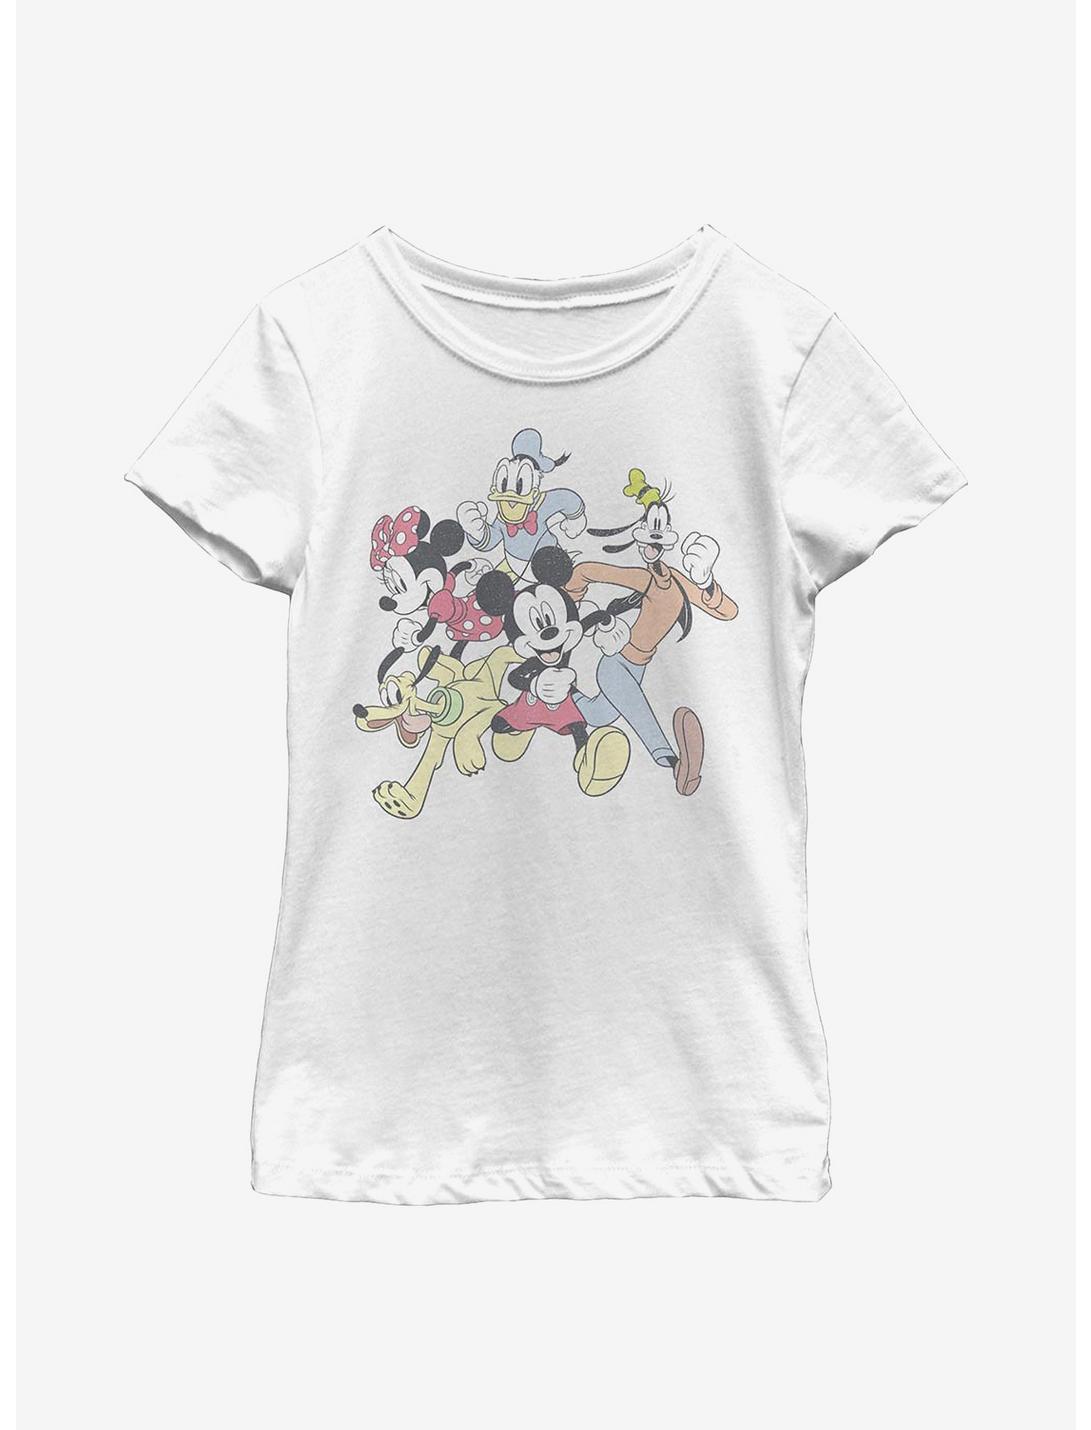 Disney Mickey Mouse Group Run Youth Girls T-Shirt, WHITE, hi-res